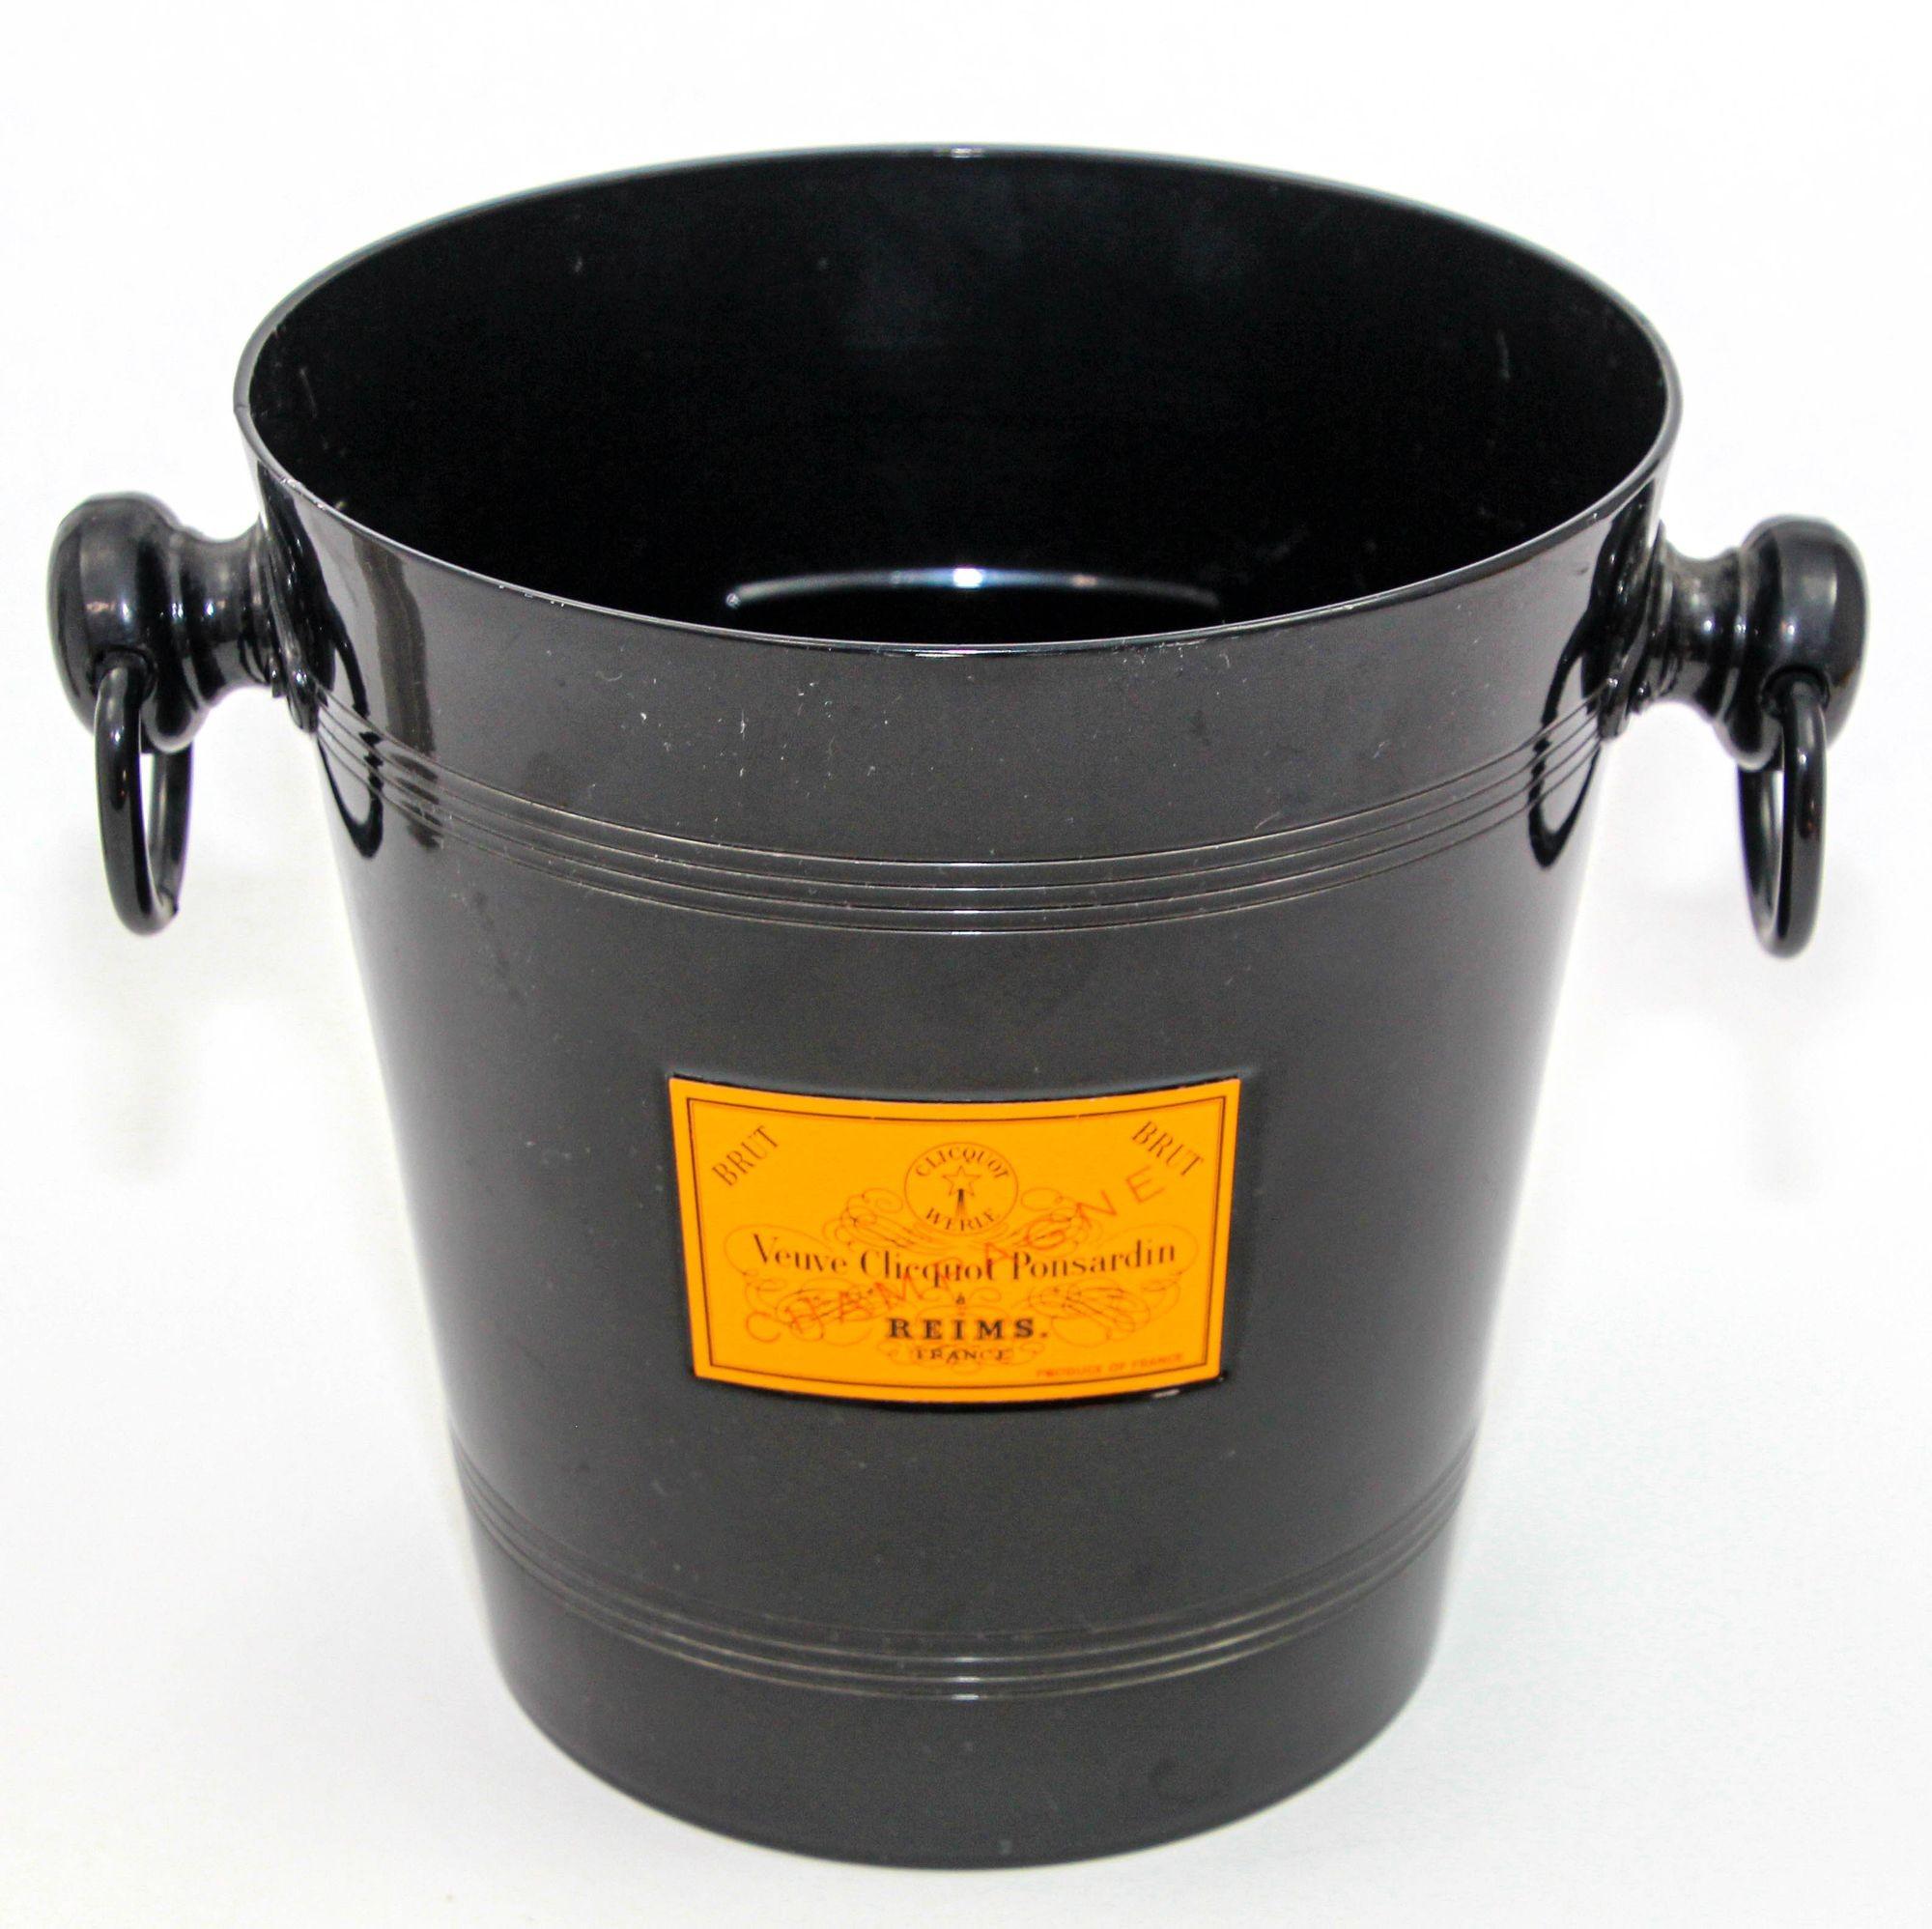 VEUVE CLICQUOT Black and Orange French Champagne Cooler Bucket 